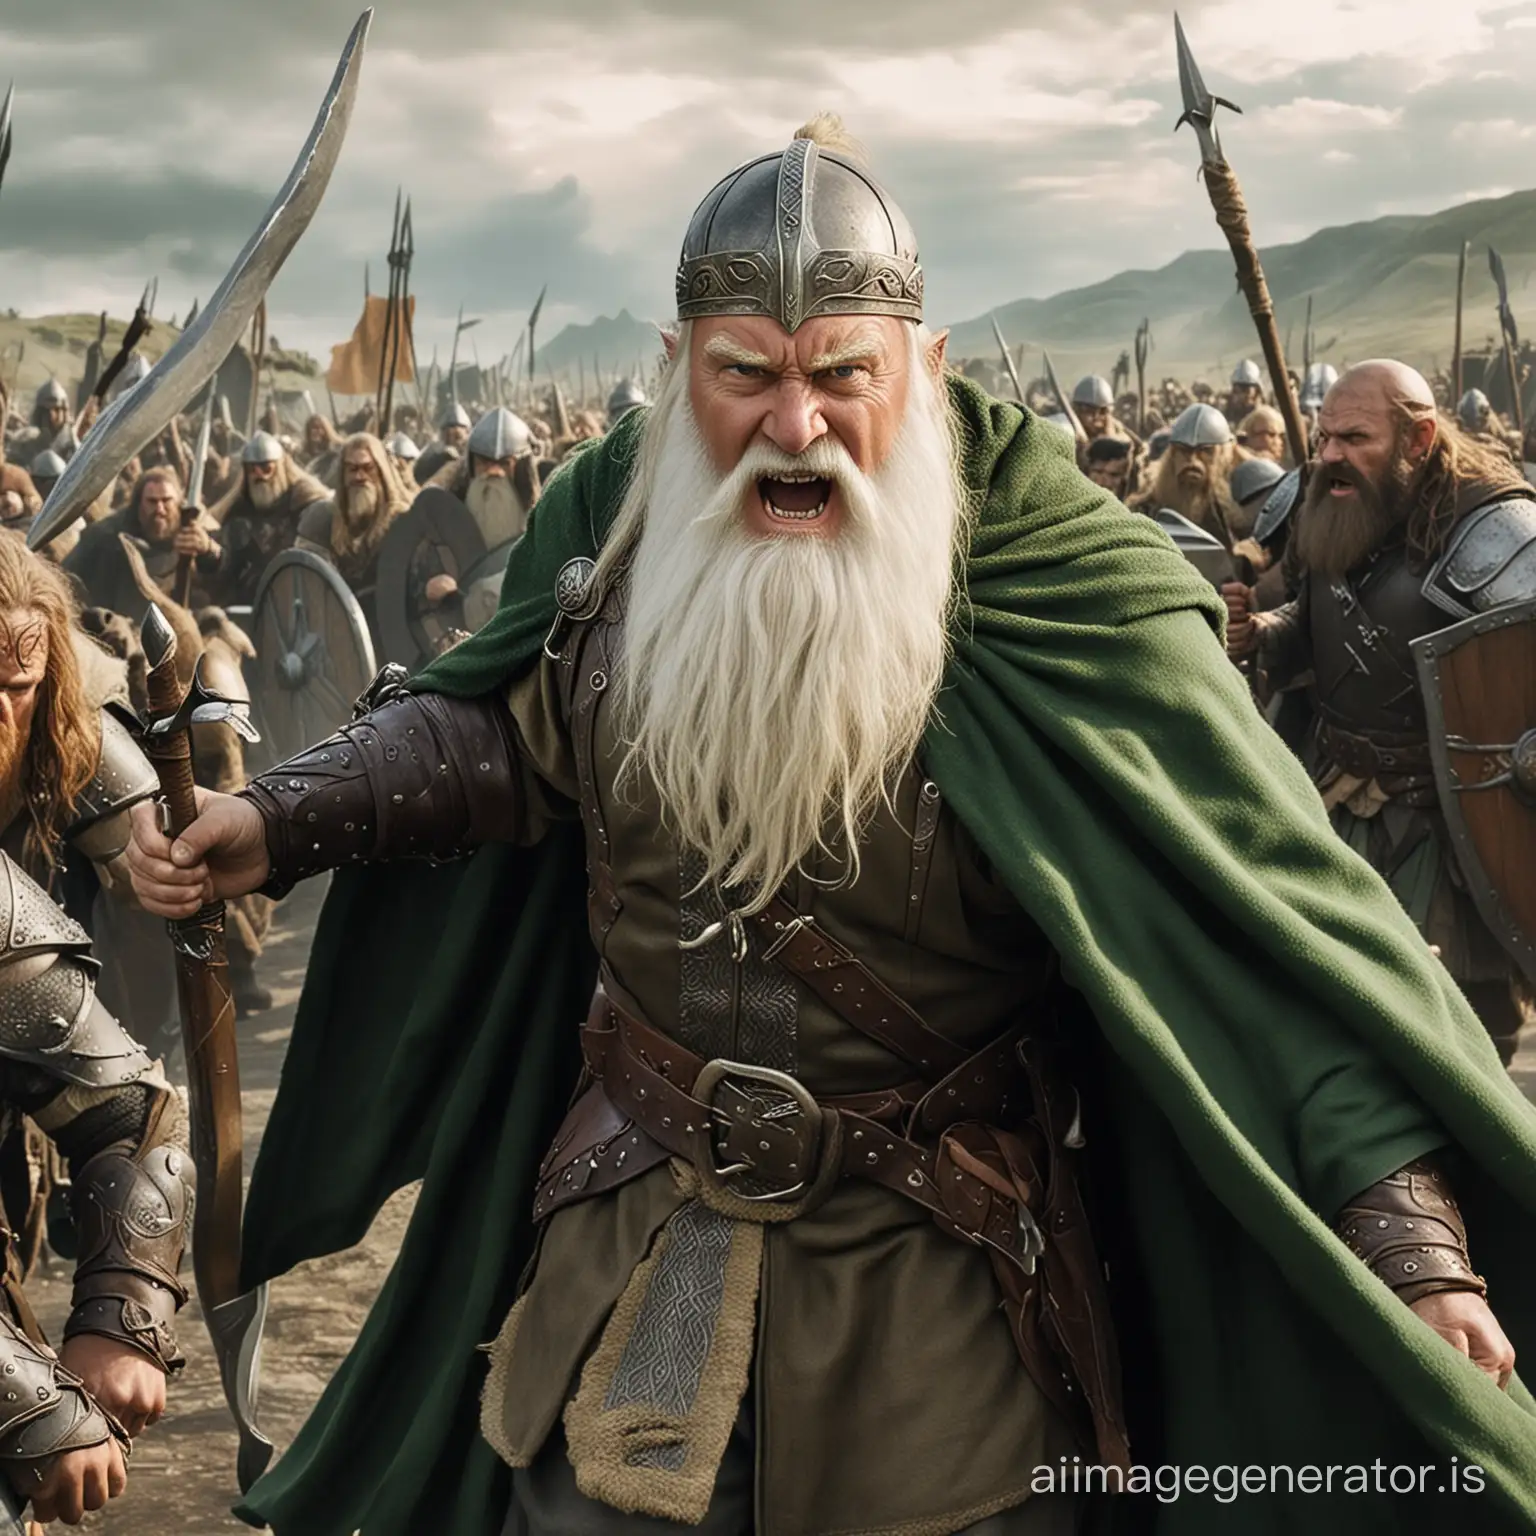 Gimli from lord of the rings fighting in a battle against orcs. He has a white beard and a green cape.